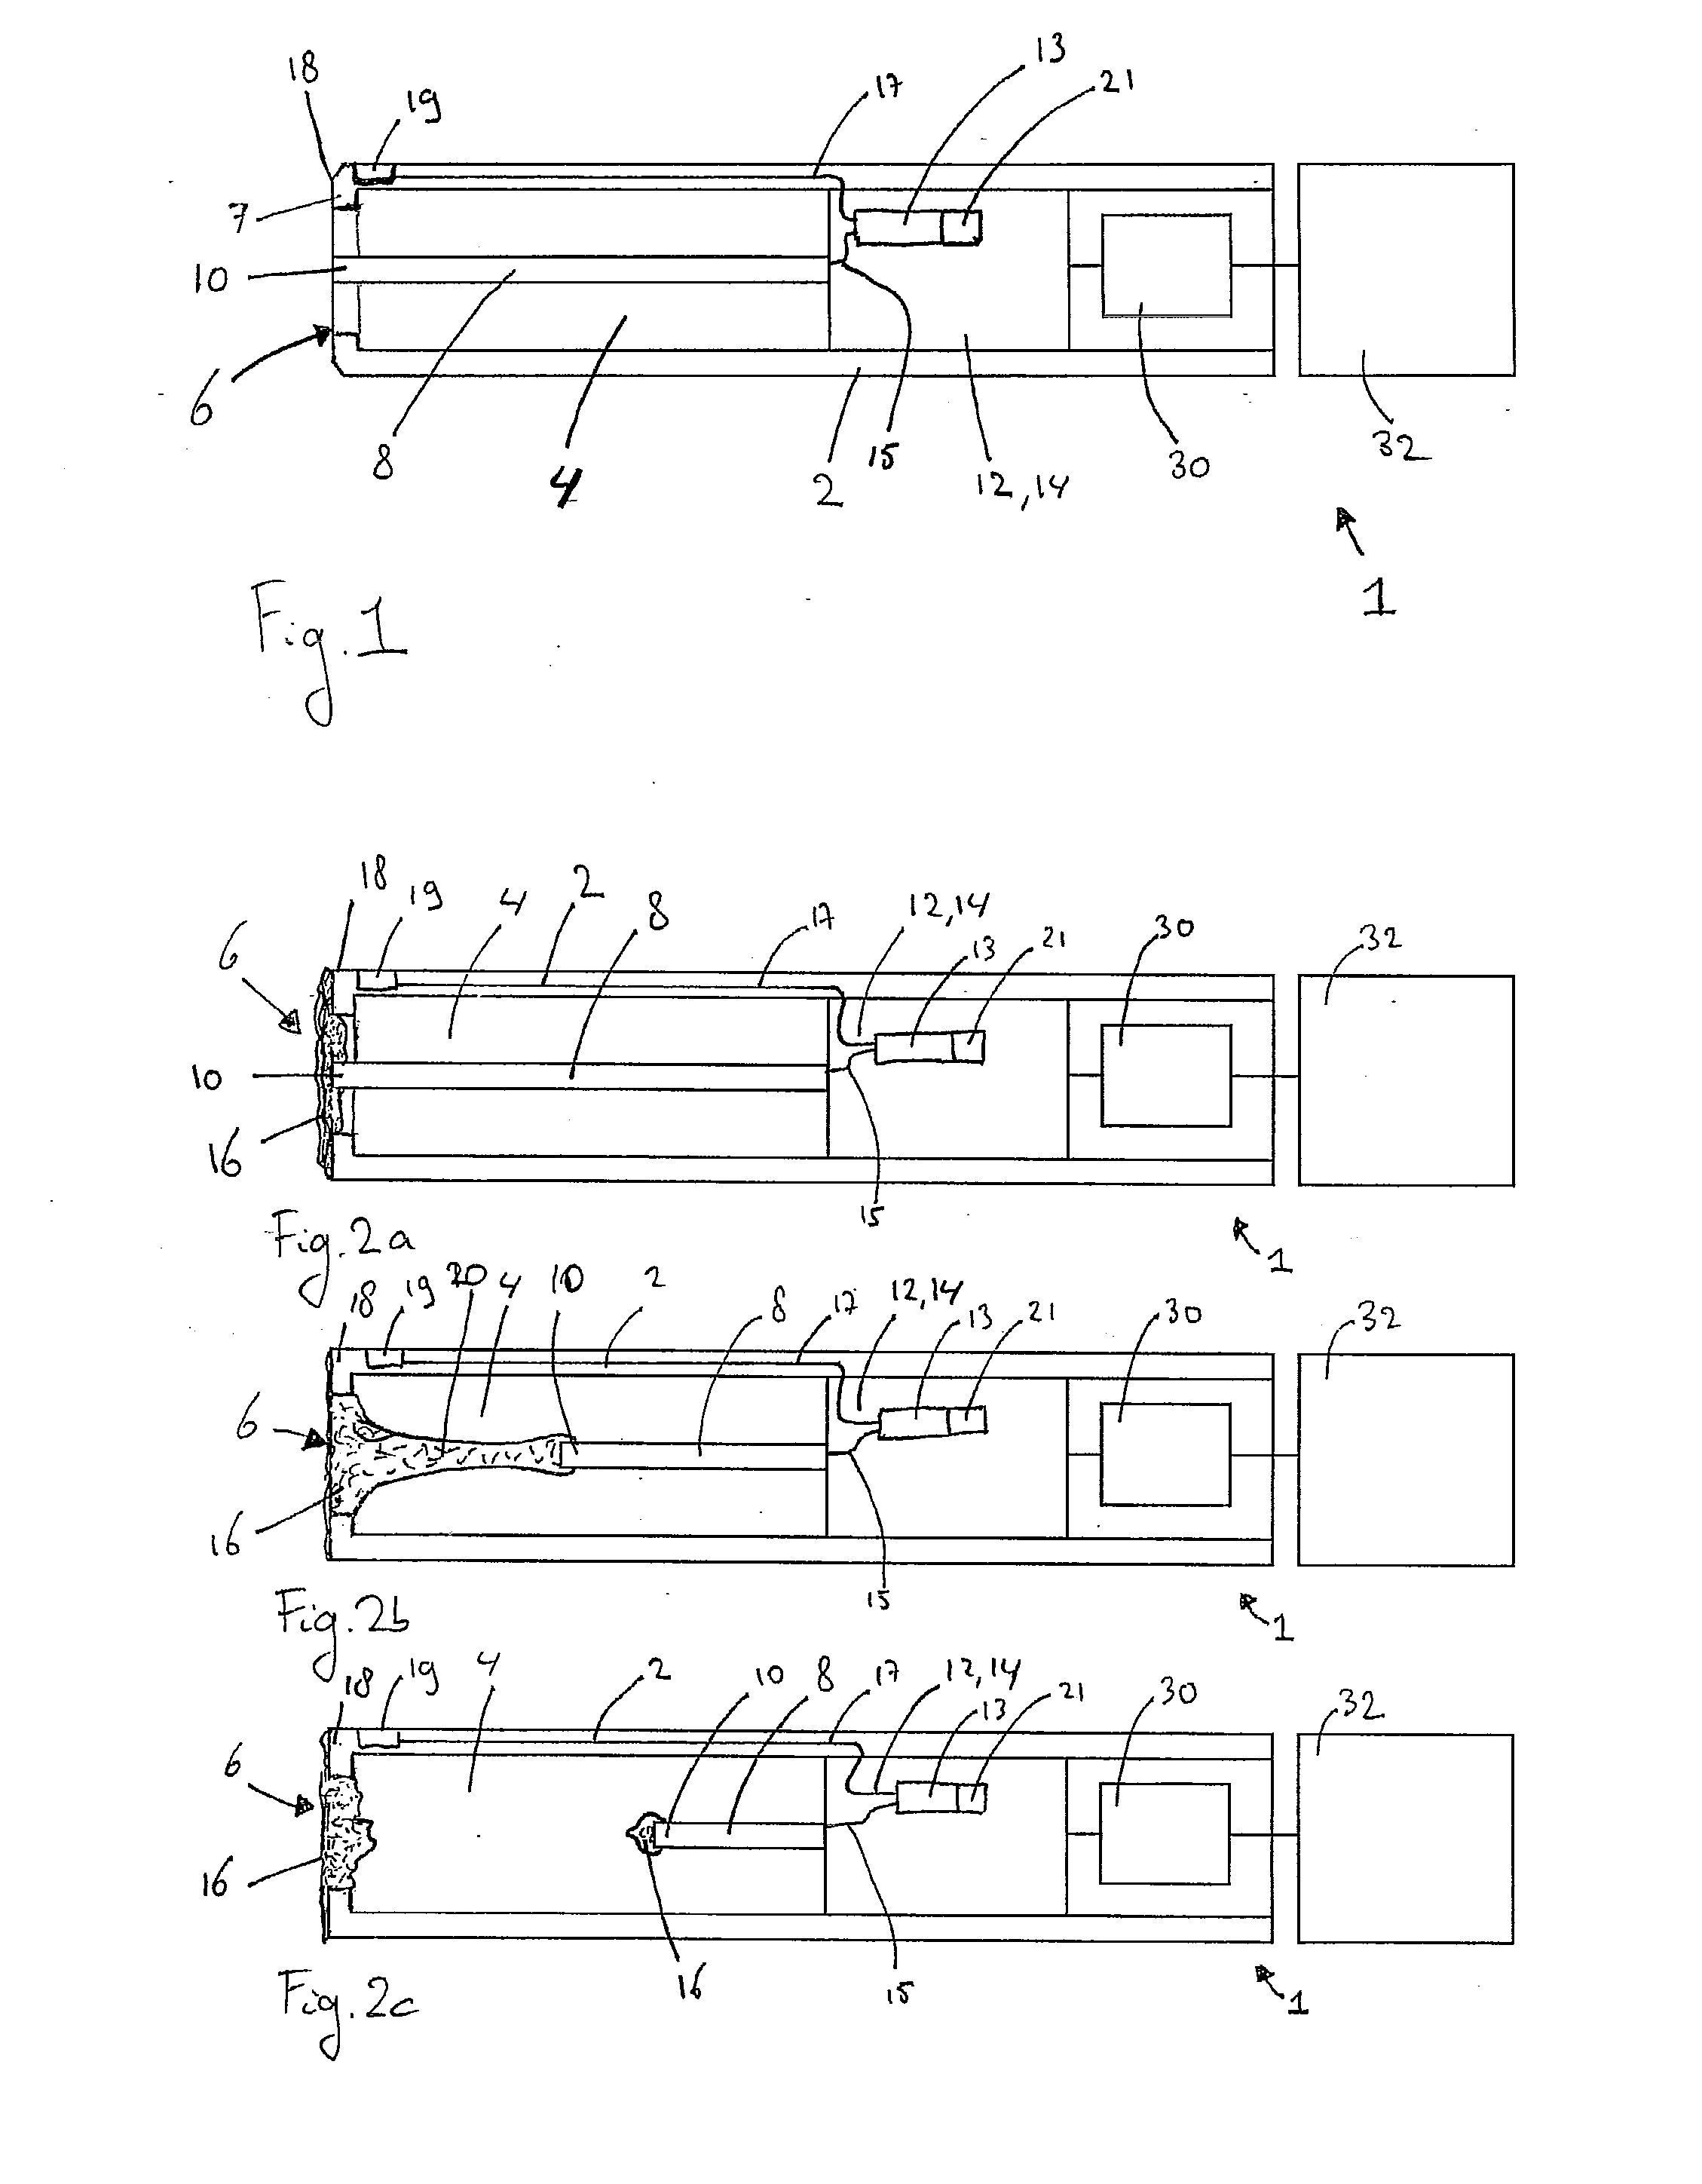 Device and method for determining a rheological property of mucus